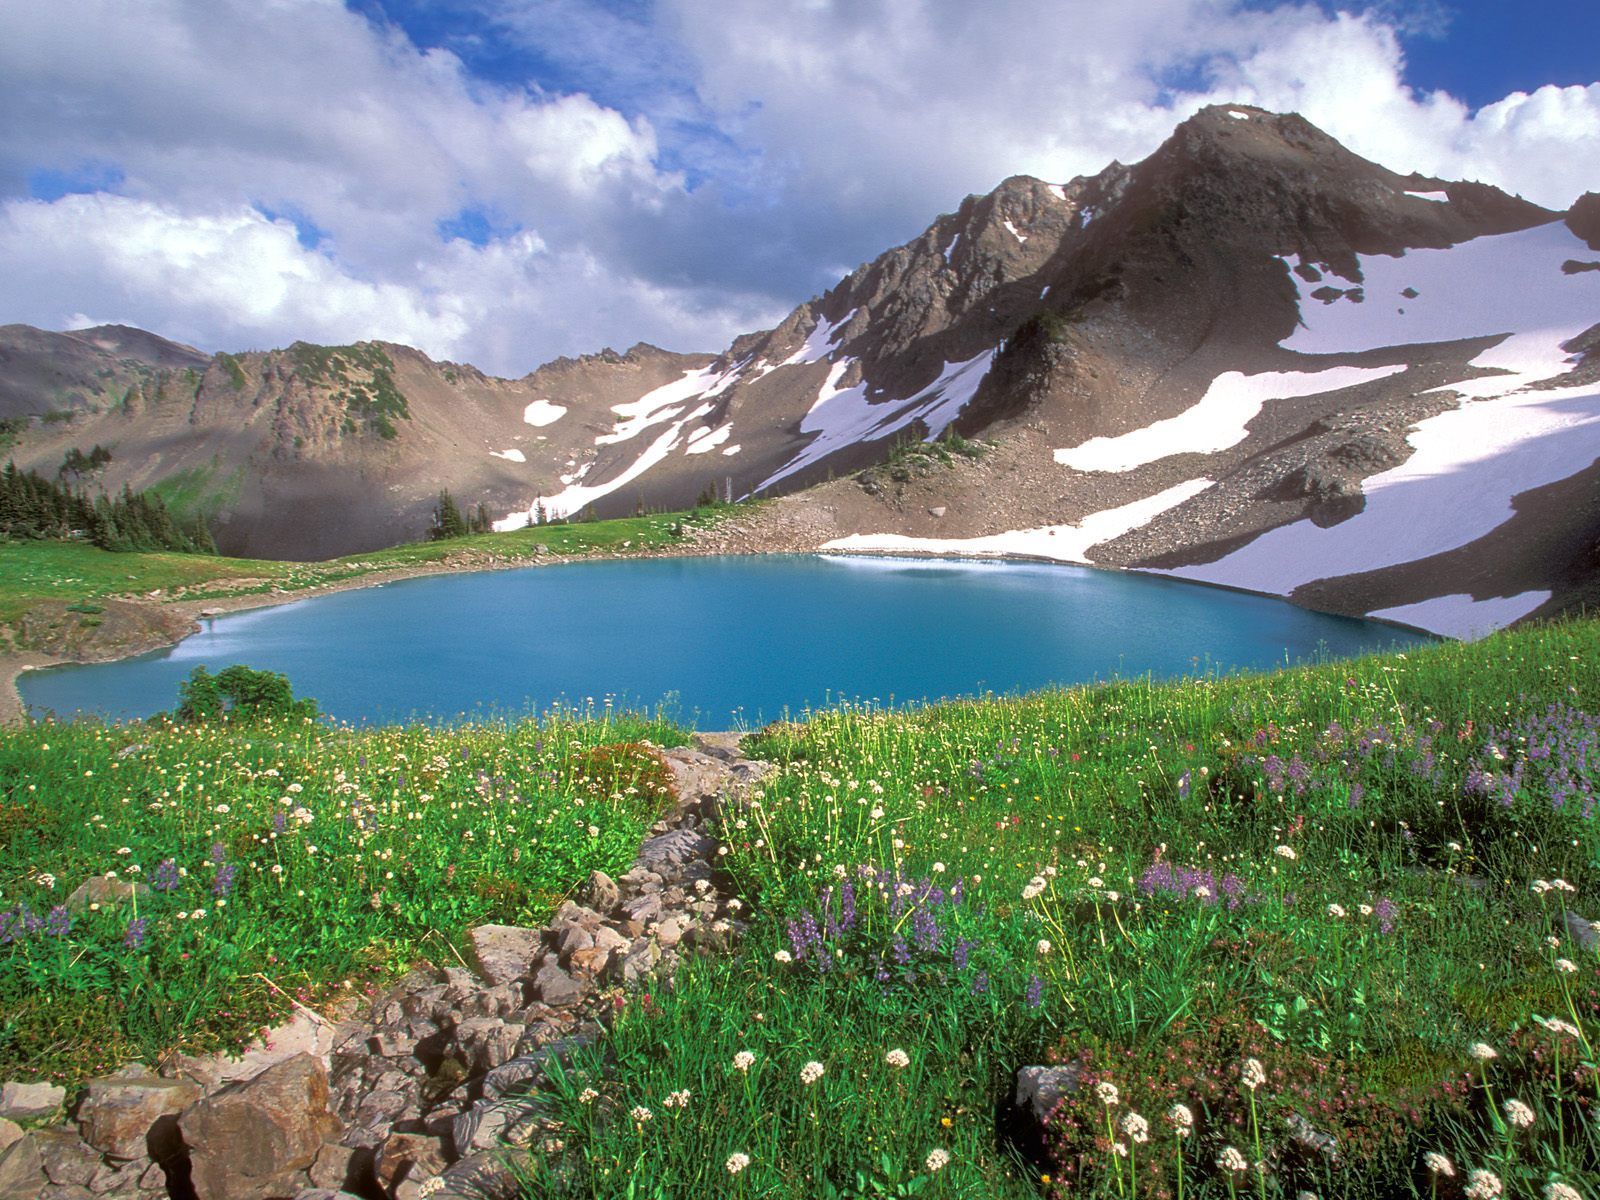 alps, greens, nature, stones, mountains, lake, national park, blue water download HD wallpaper